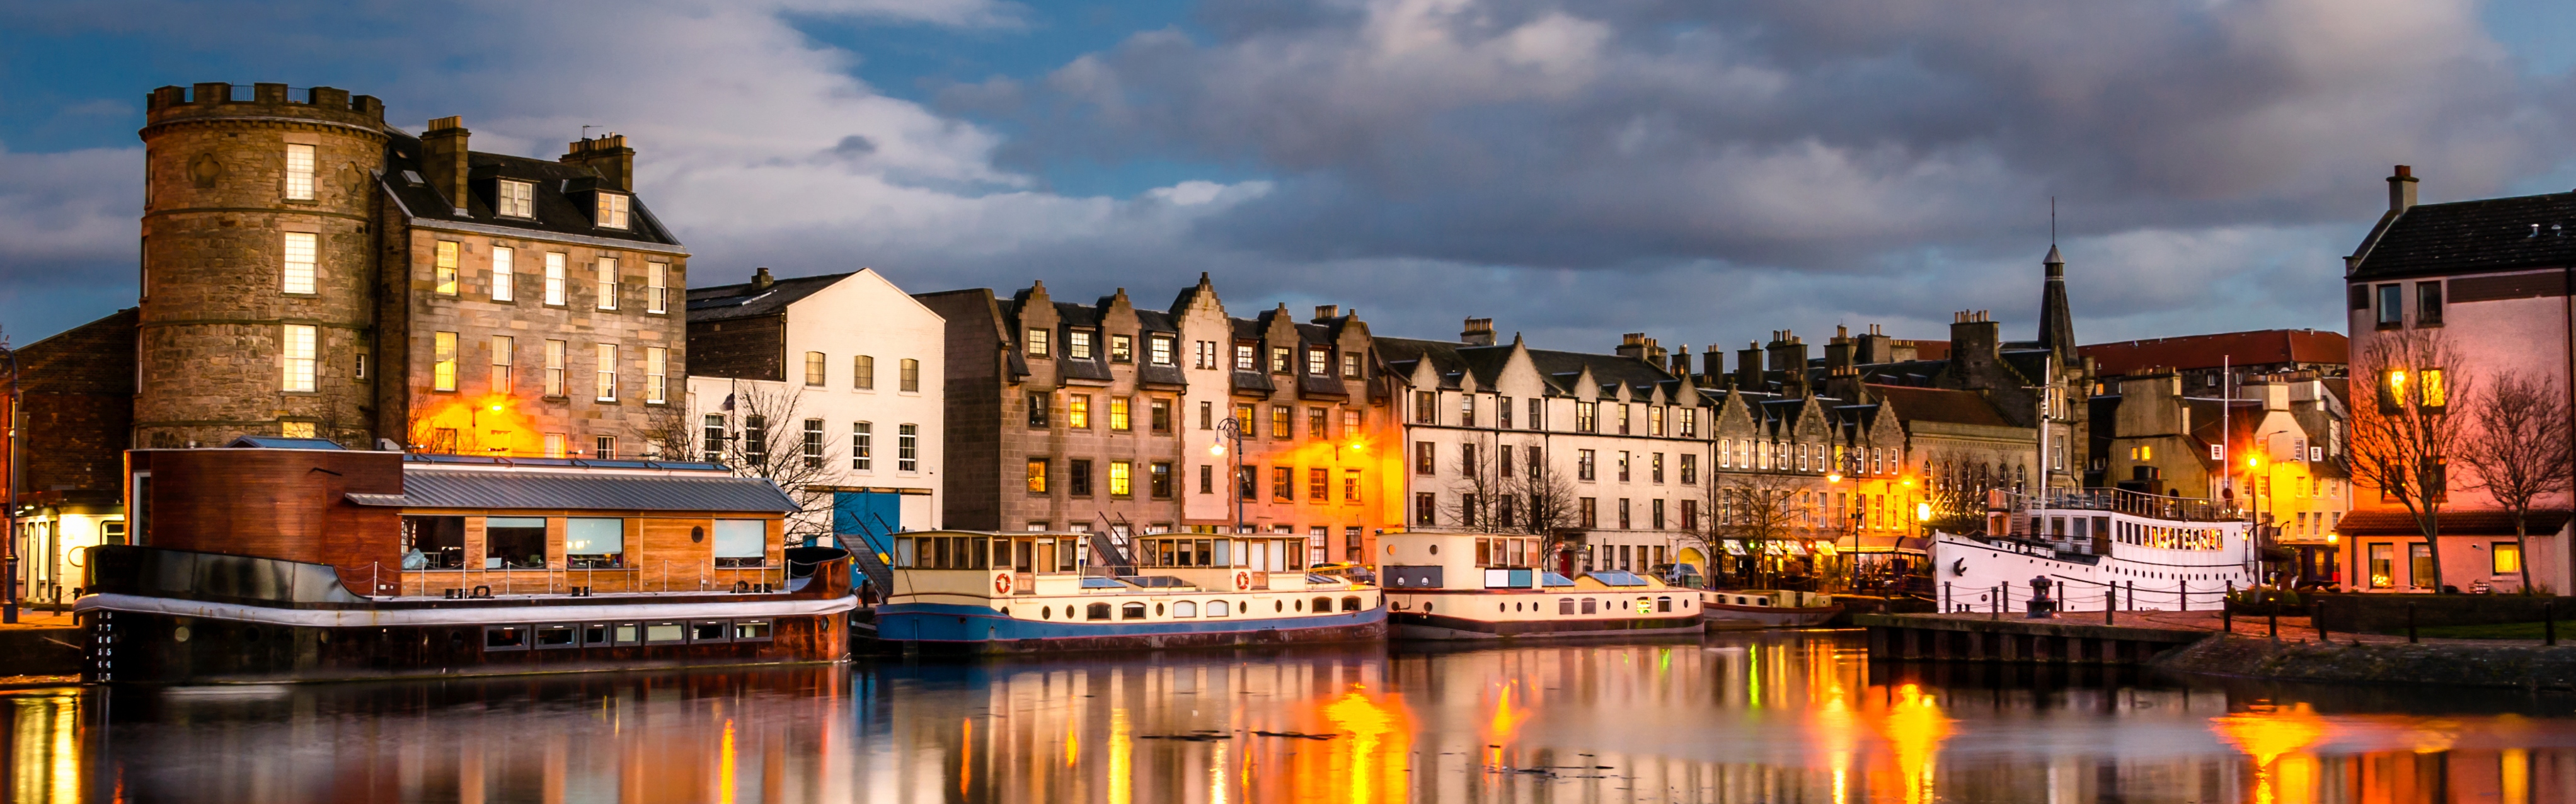 Old Leiths Docks at Dusk and Reflection in Water. Edinburgh, Scotland.